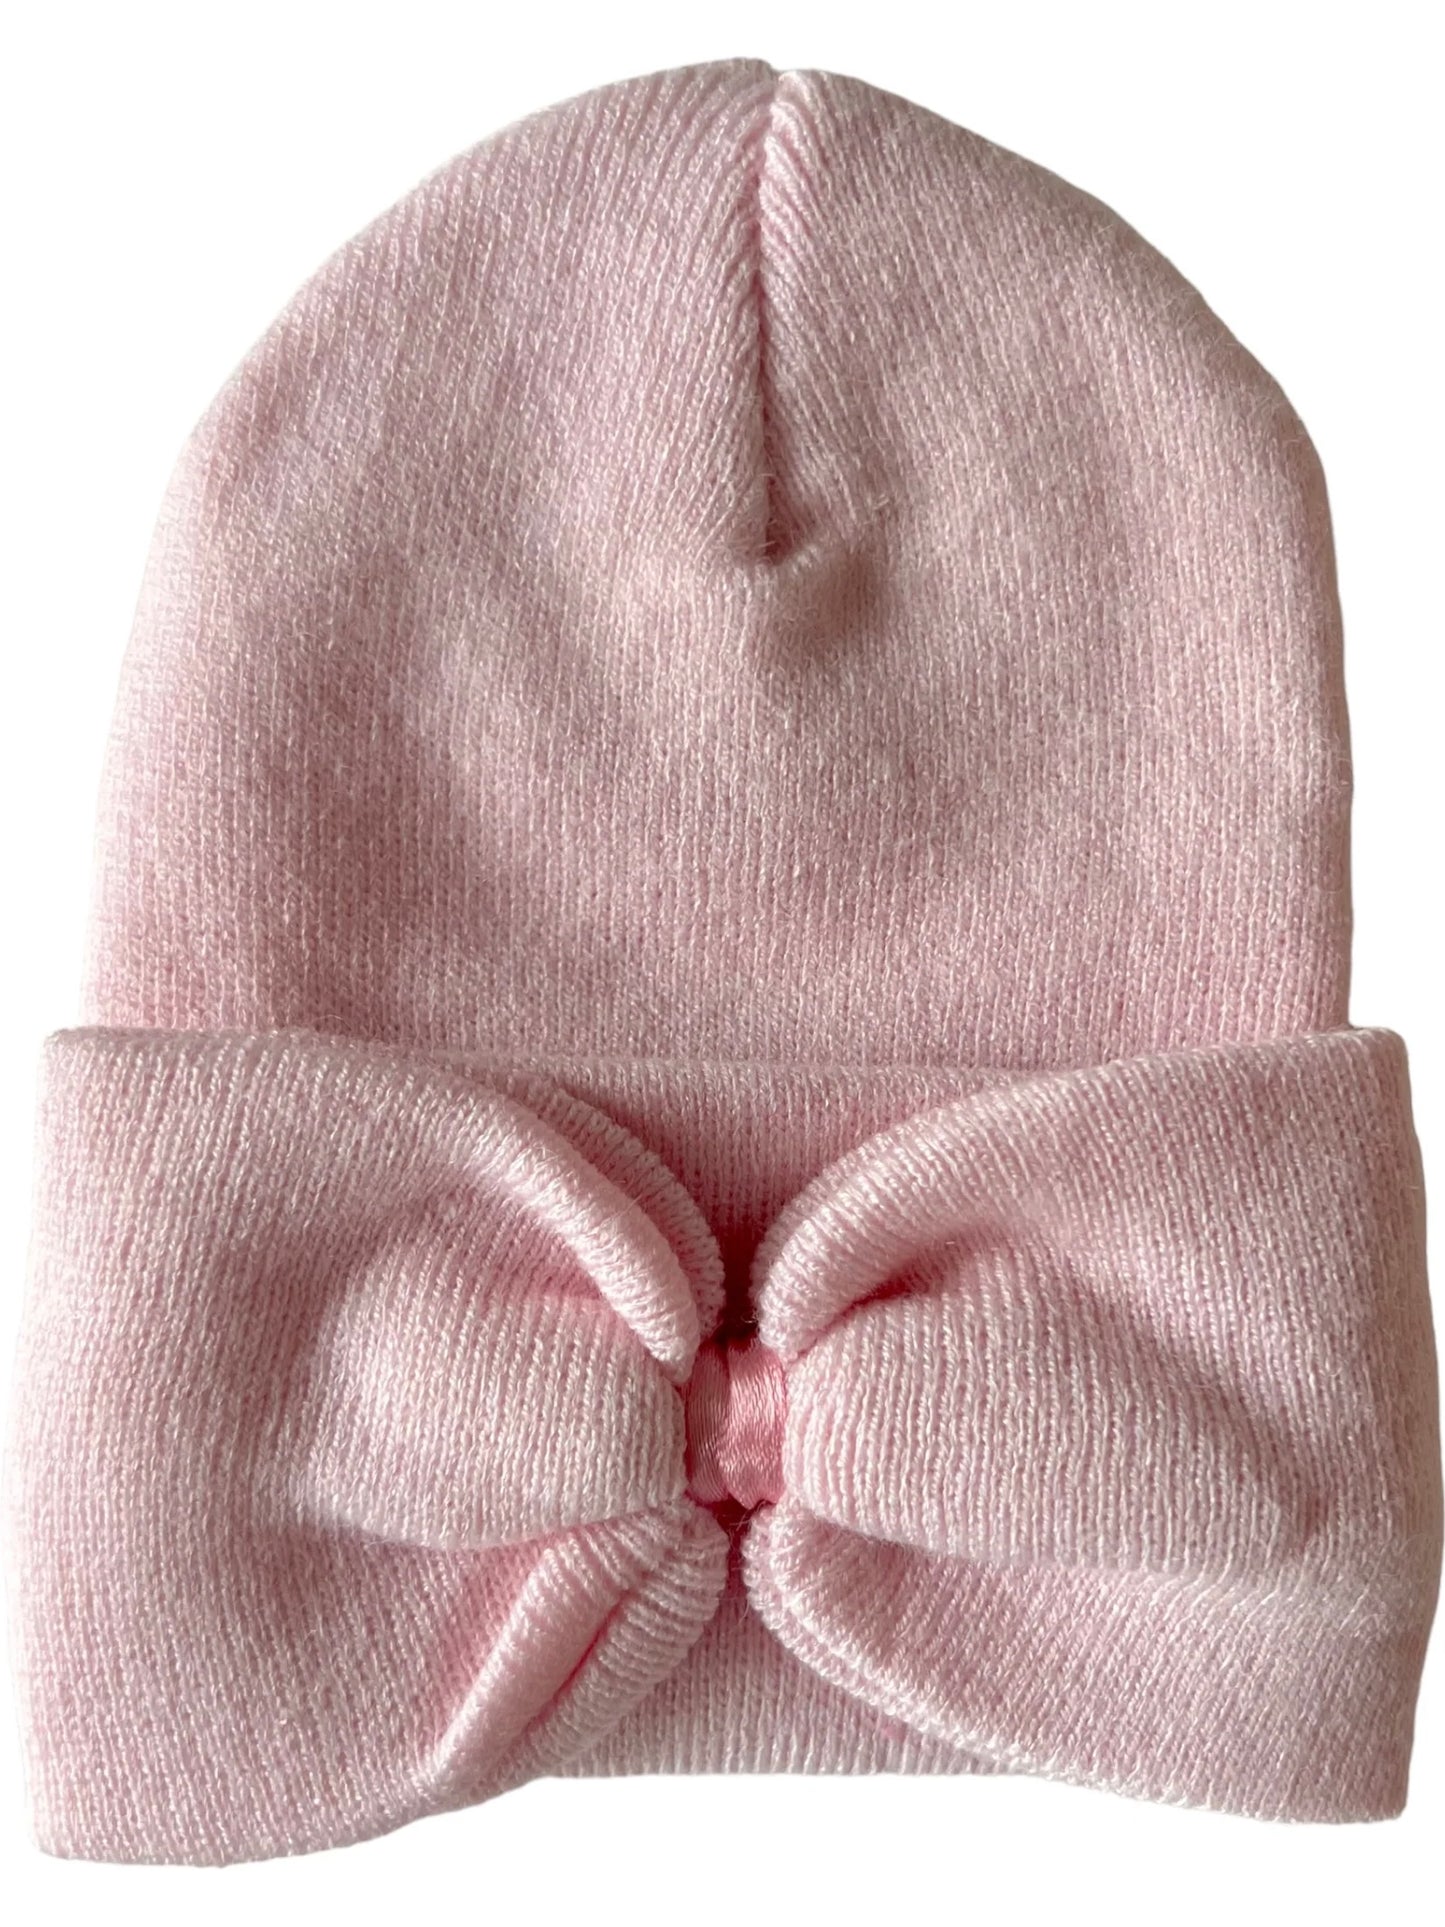 Baby's First Hat- Petal Pink Bow